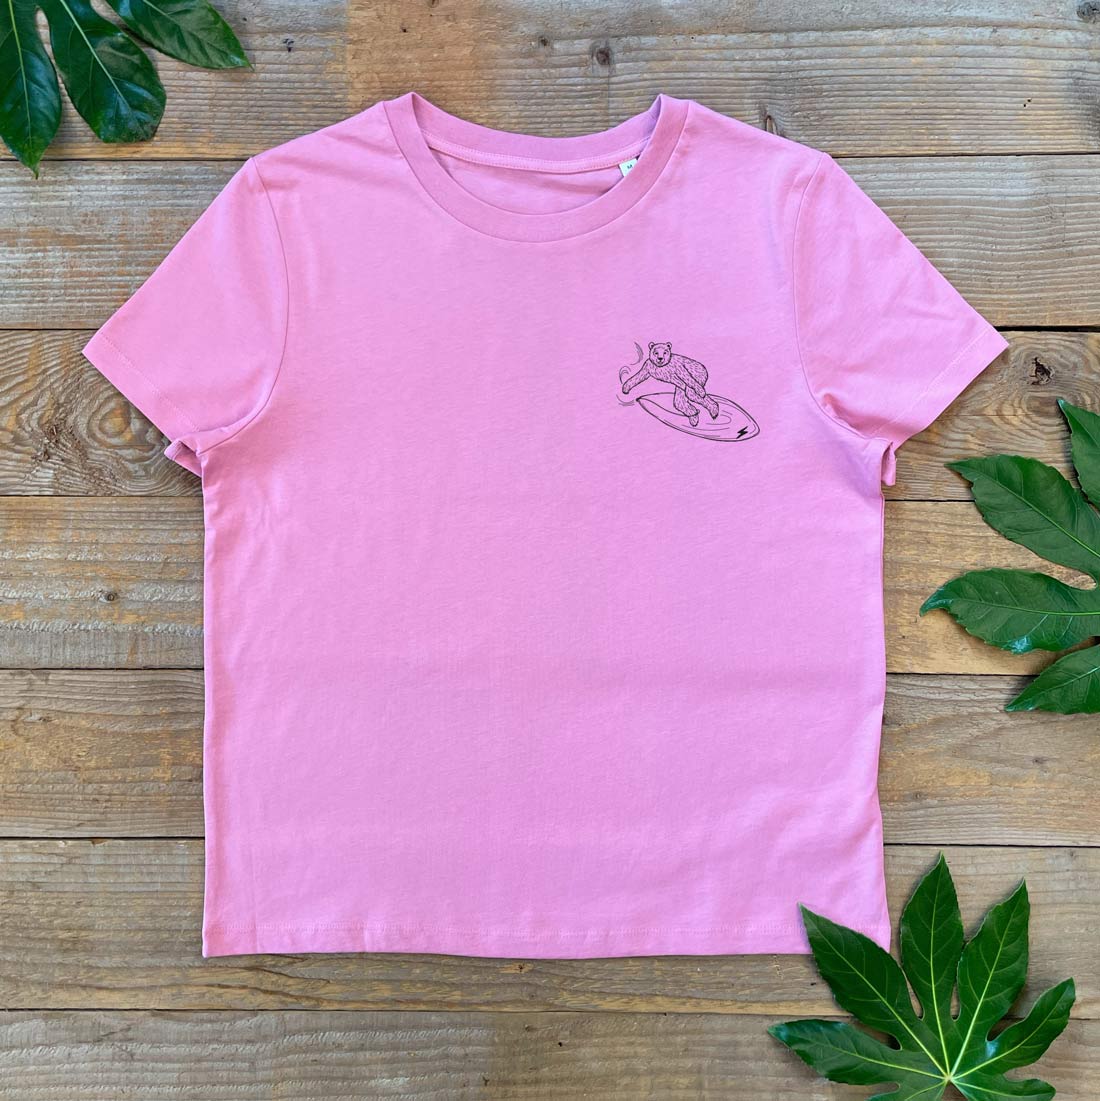 PINK TEE WITH BEAR SURFING